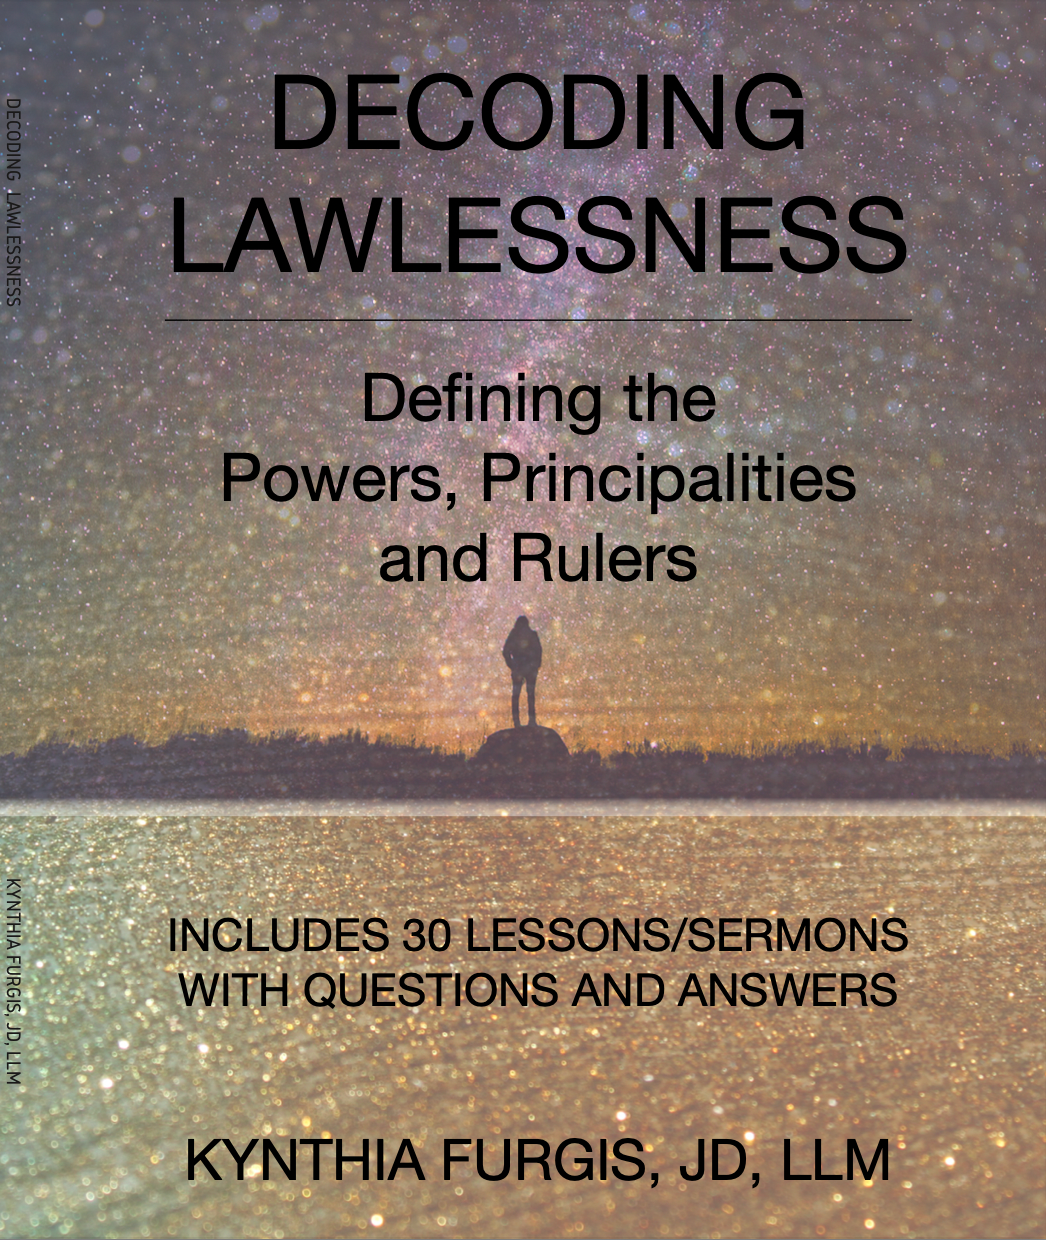 Decoding Lawlessness: Defining the Powers, Principalities, and Rulers